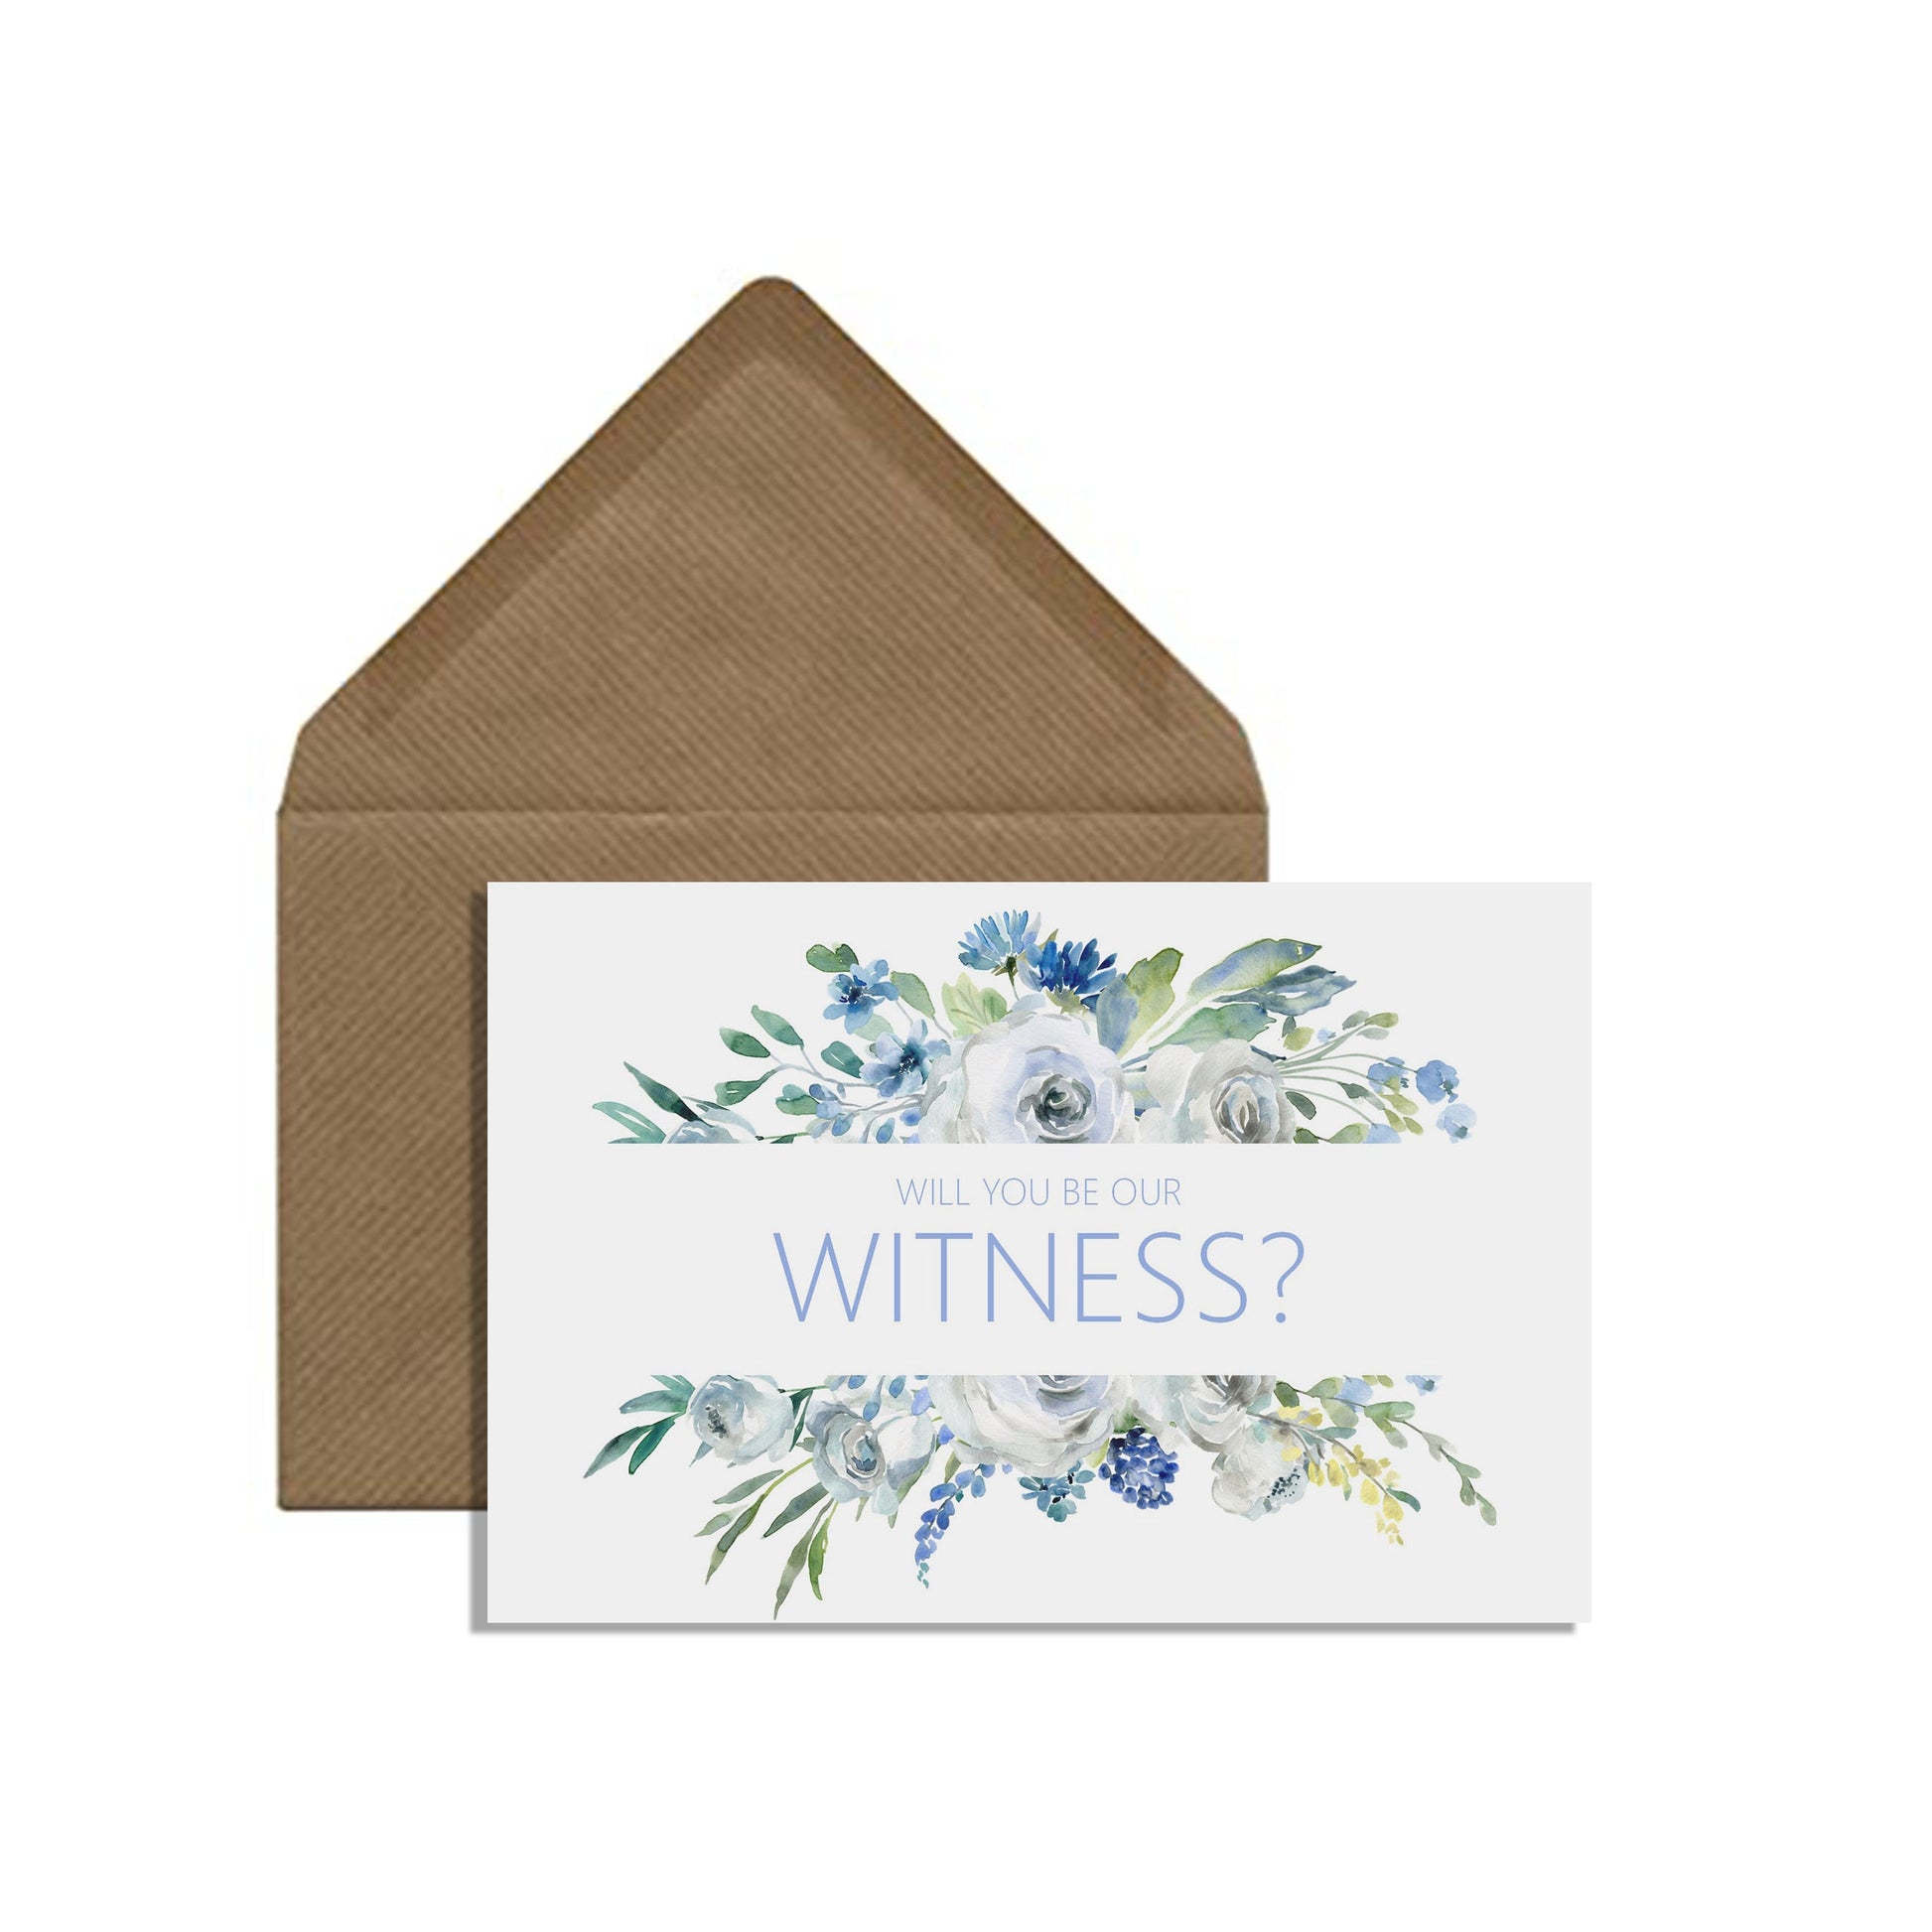 Will You Be Our Witness? Wedding Proposal Card - Blue Floral